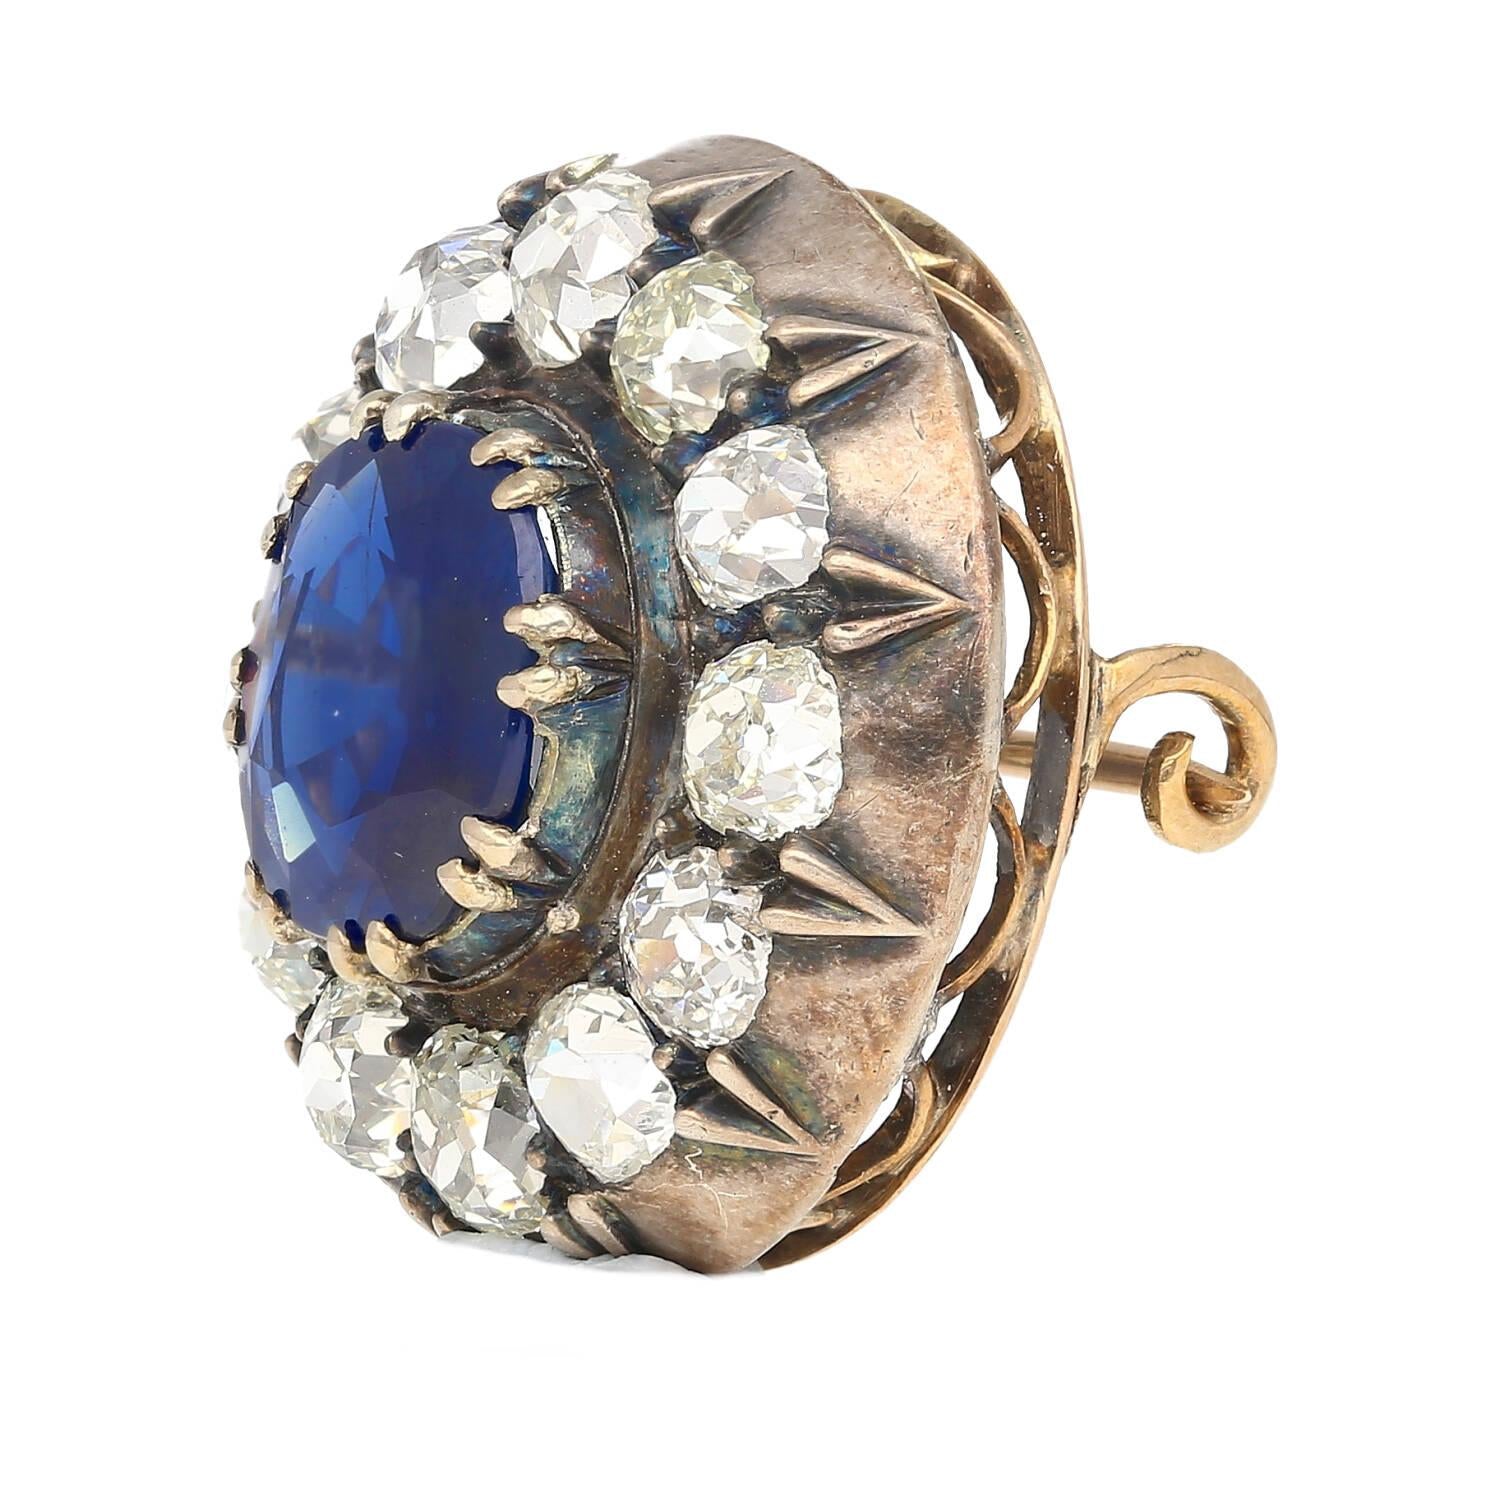 Natural No Heat 3.82 Carat Sapphire Brooch & Sapphire Stones in Silver & 9K Gold